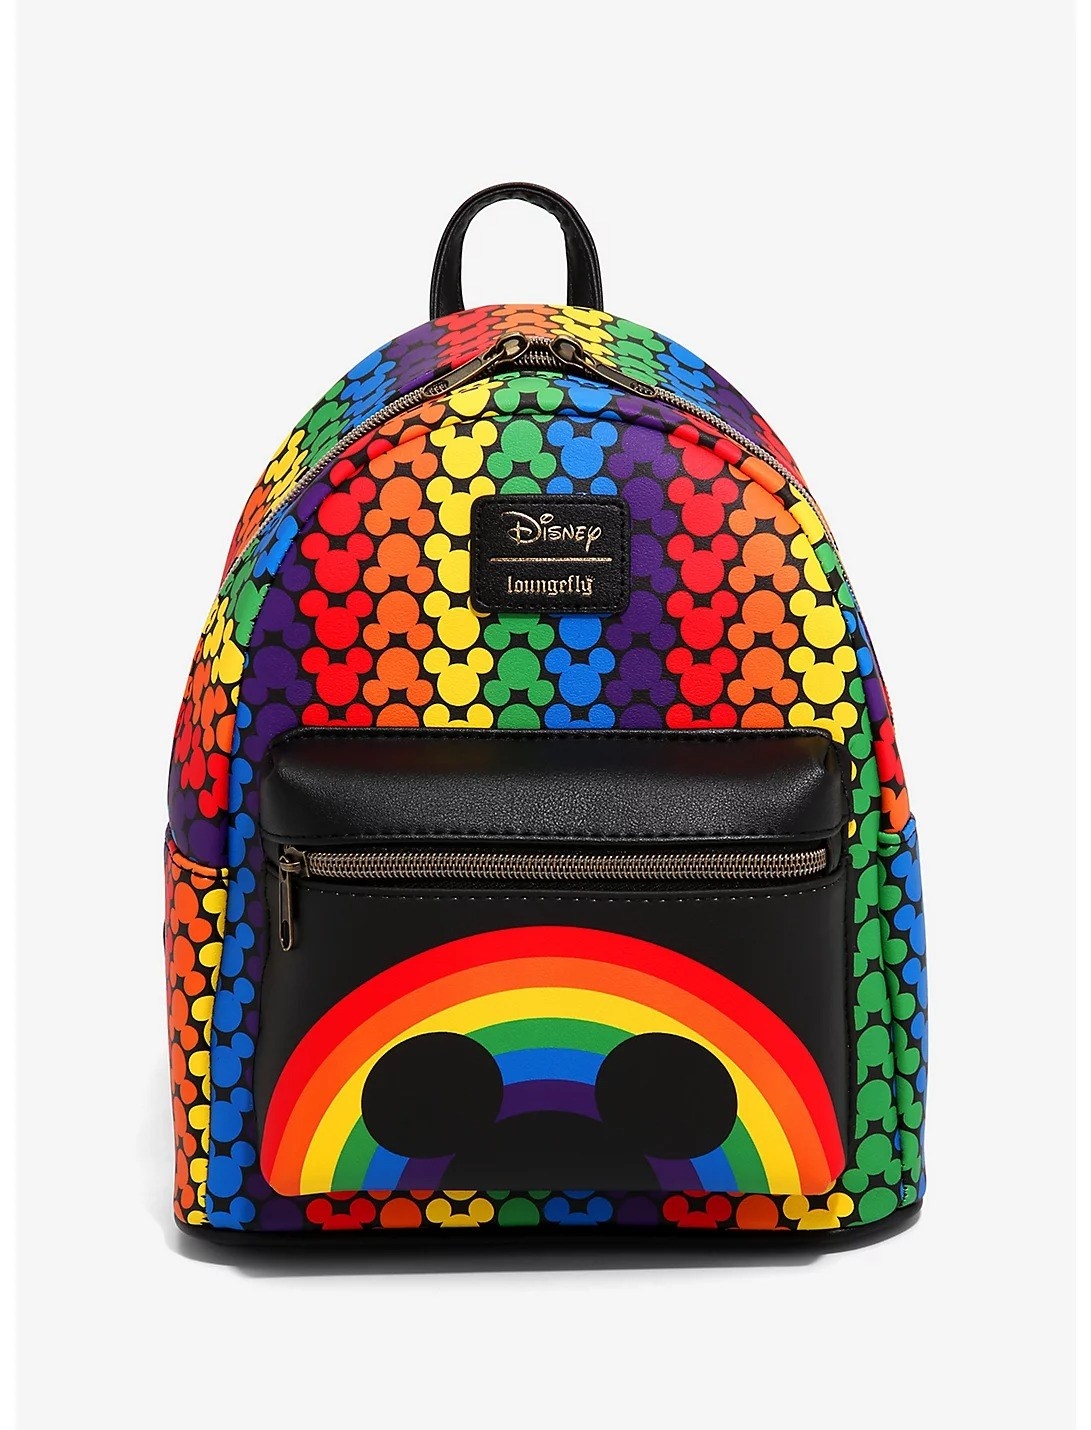 A mini backpack with allover mickey head shape print in rainbow colors